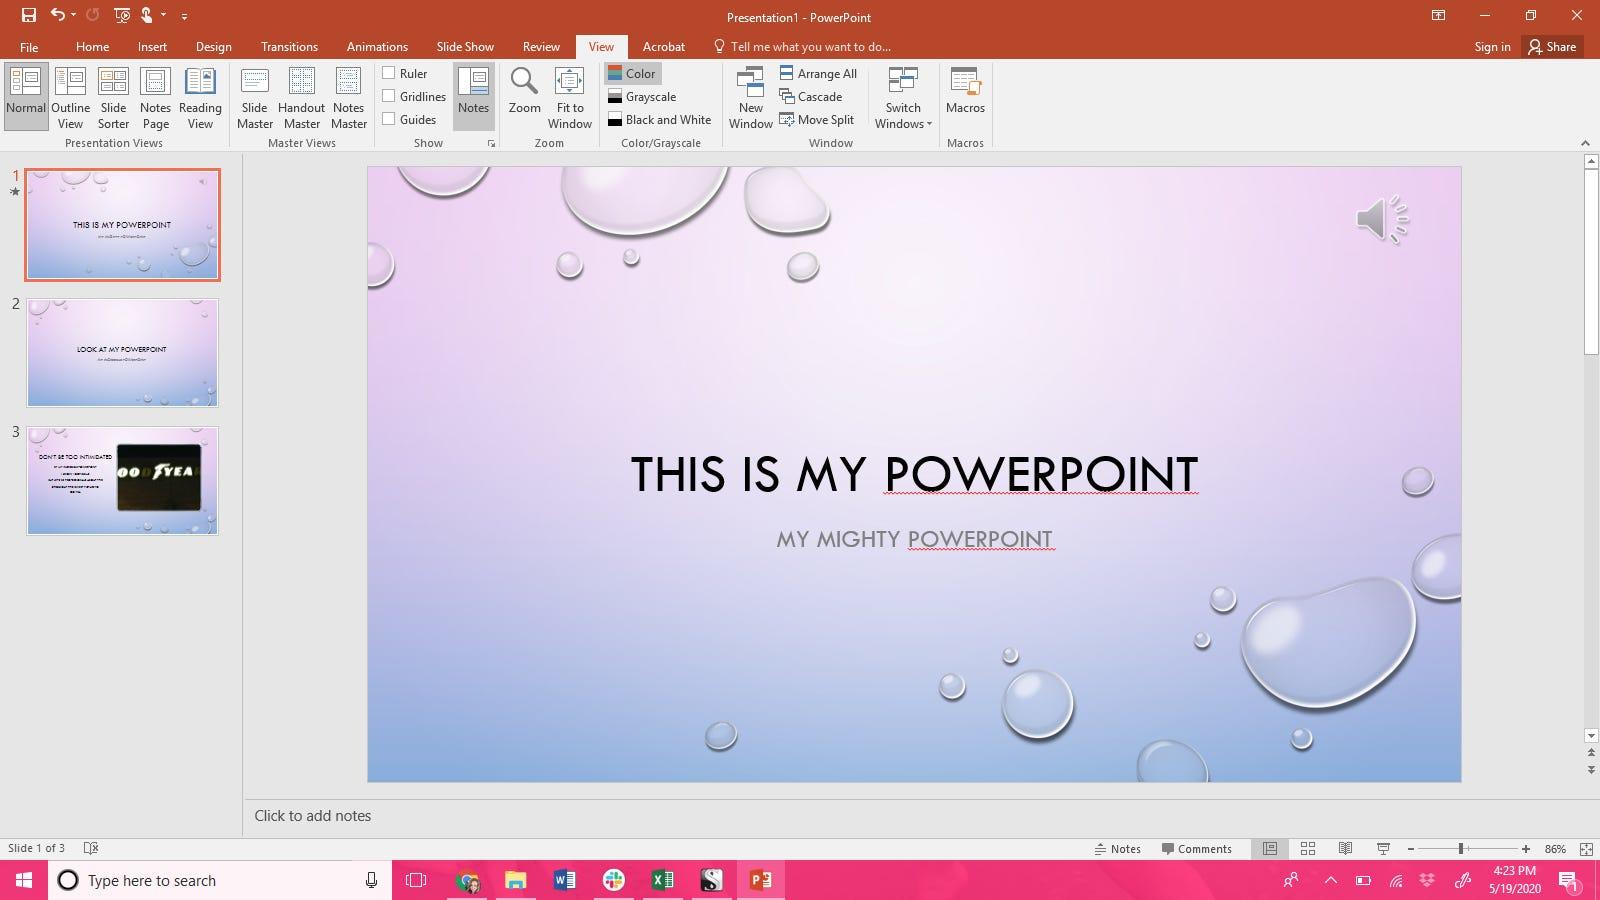 notes on power point presentation